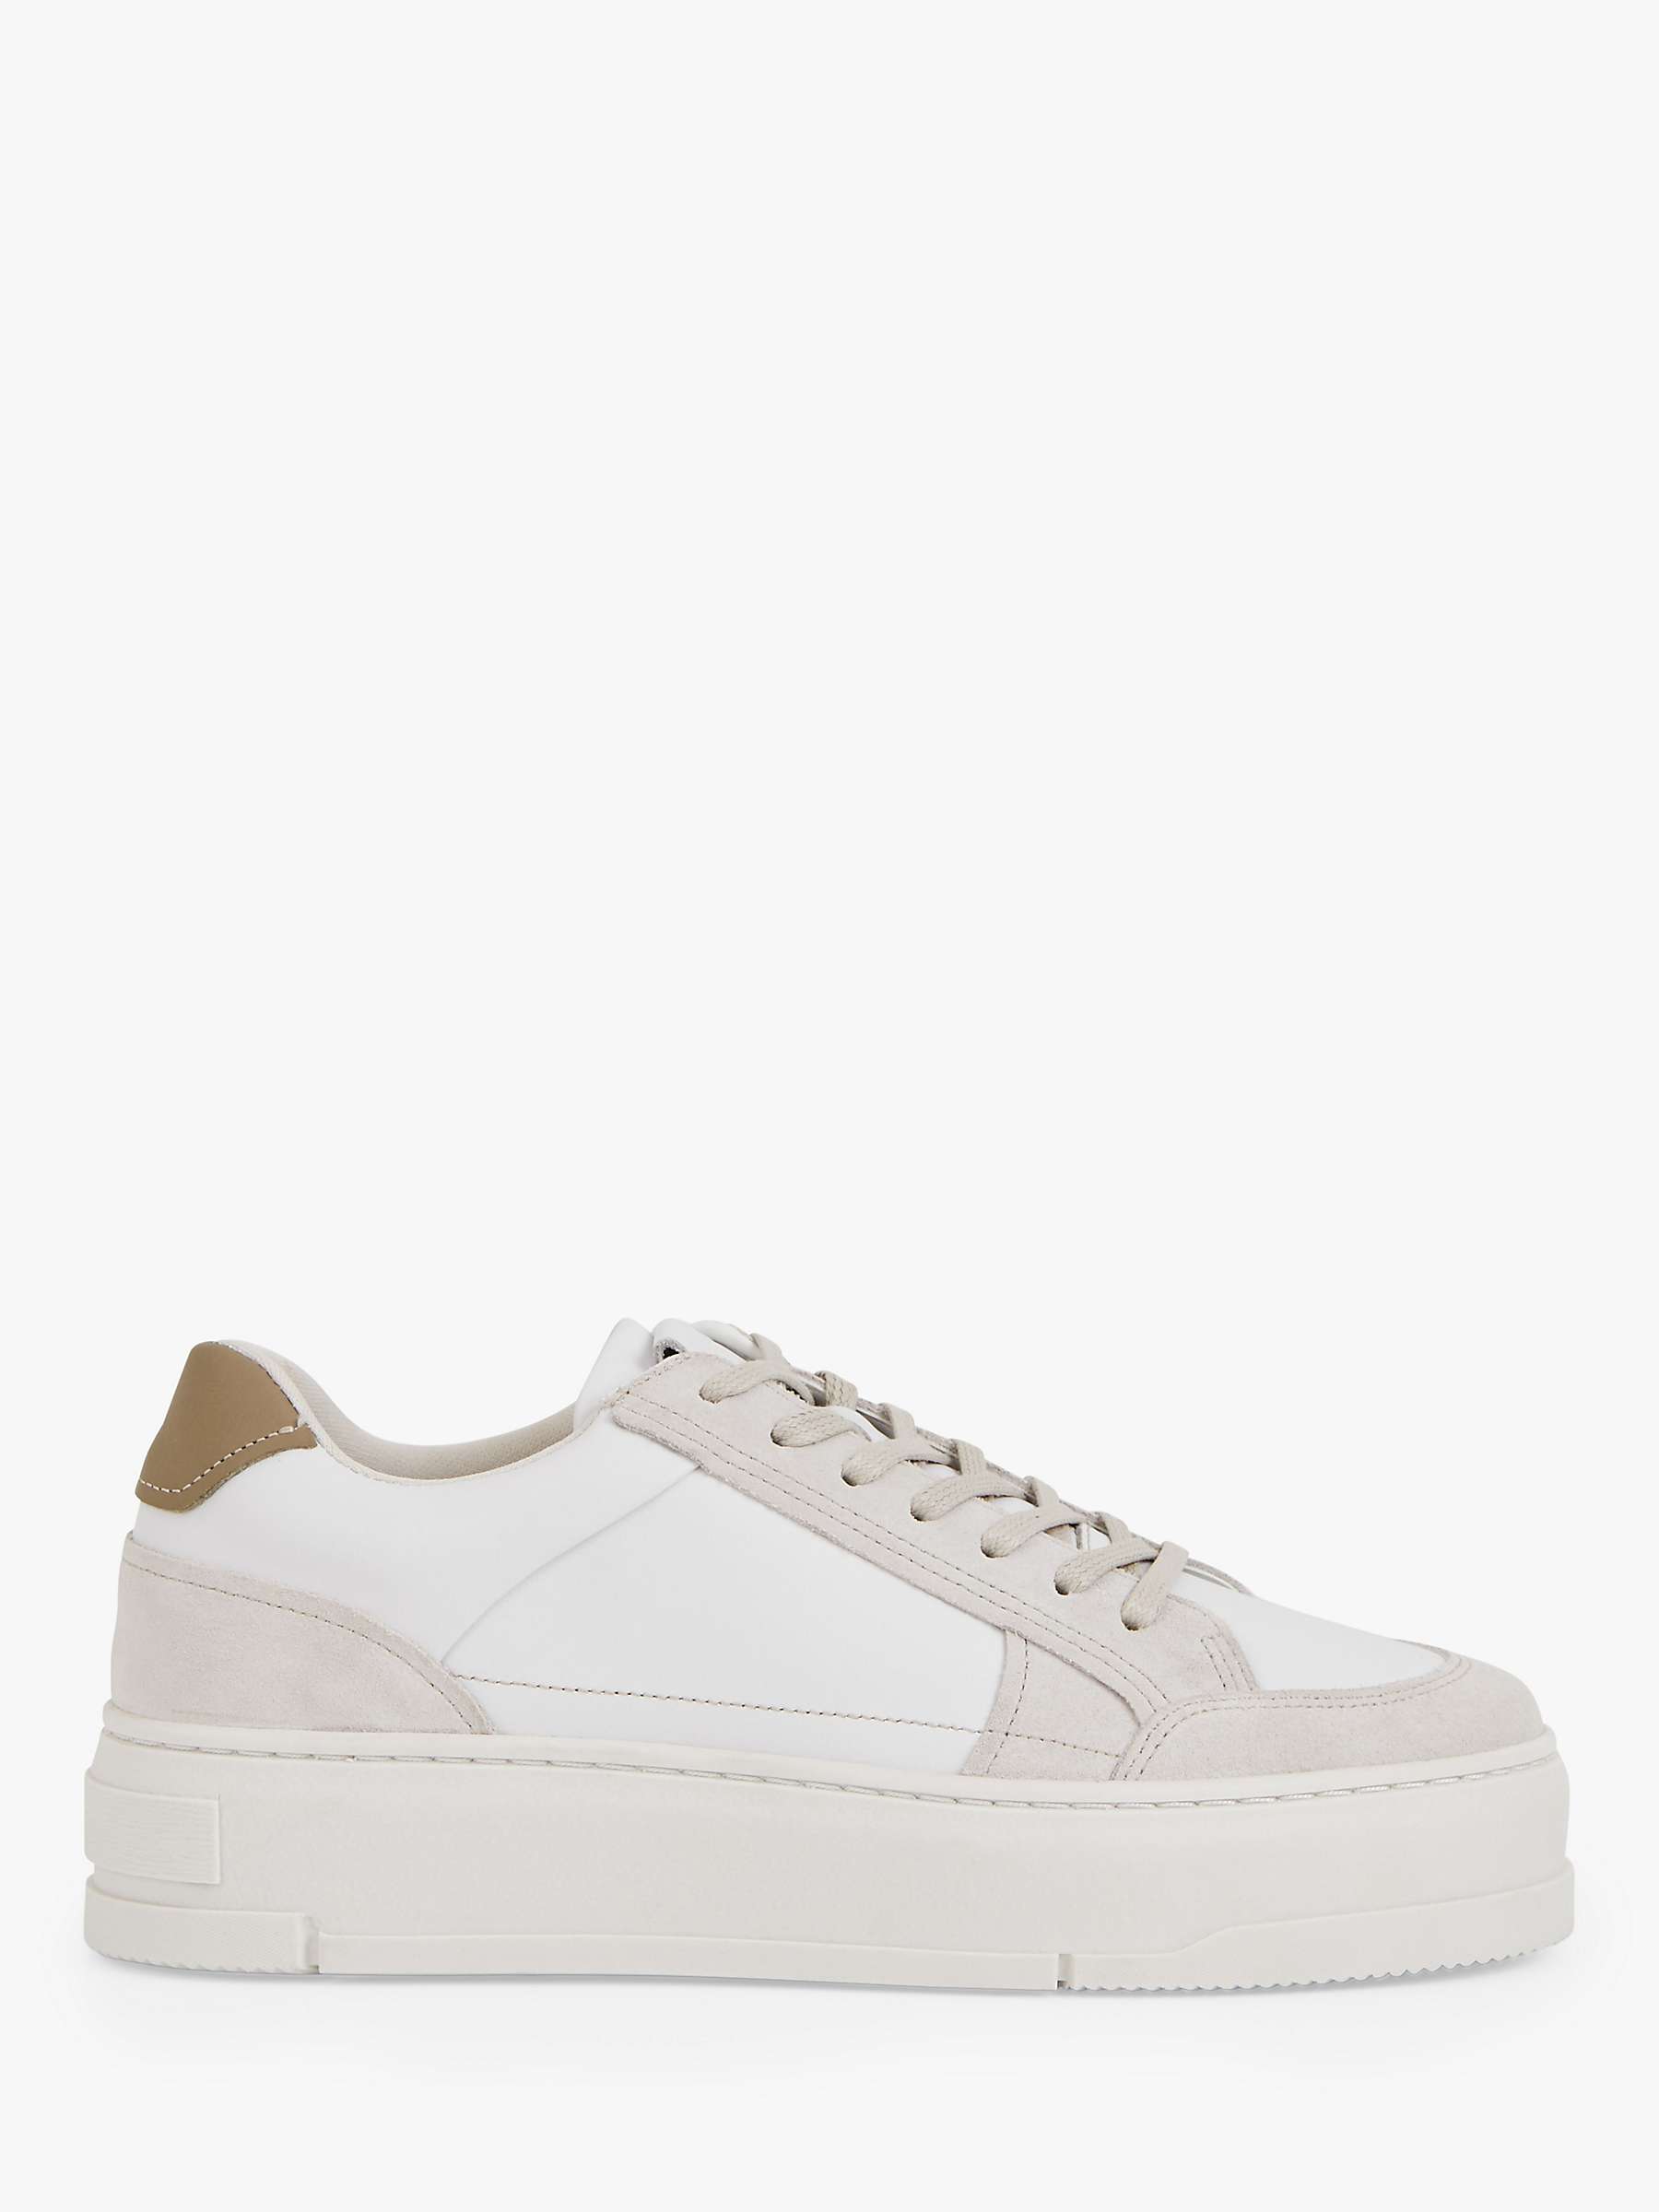 Buy Vagabond Shoemakers Judy Leather Trainers, White Salt Online at johnlewis.com